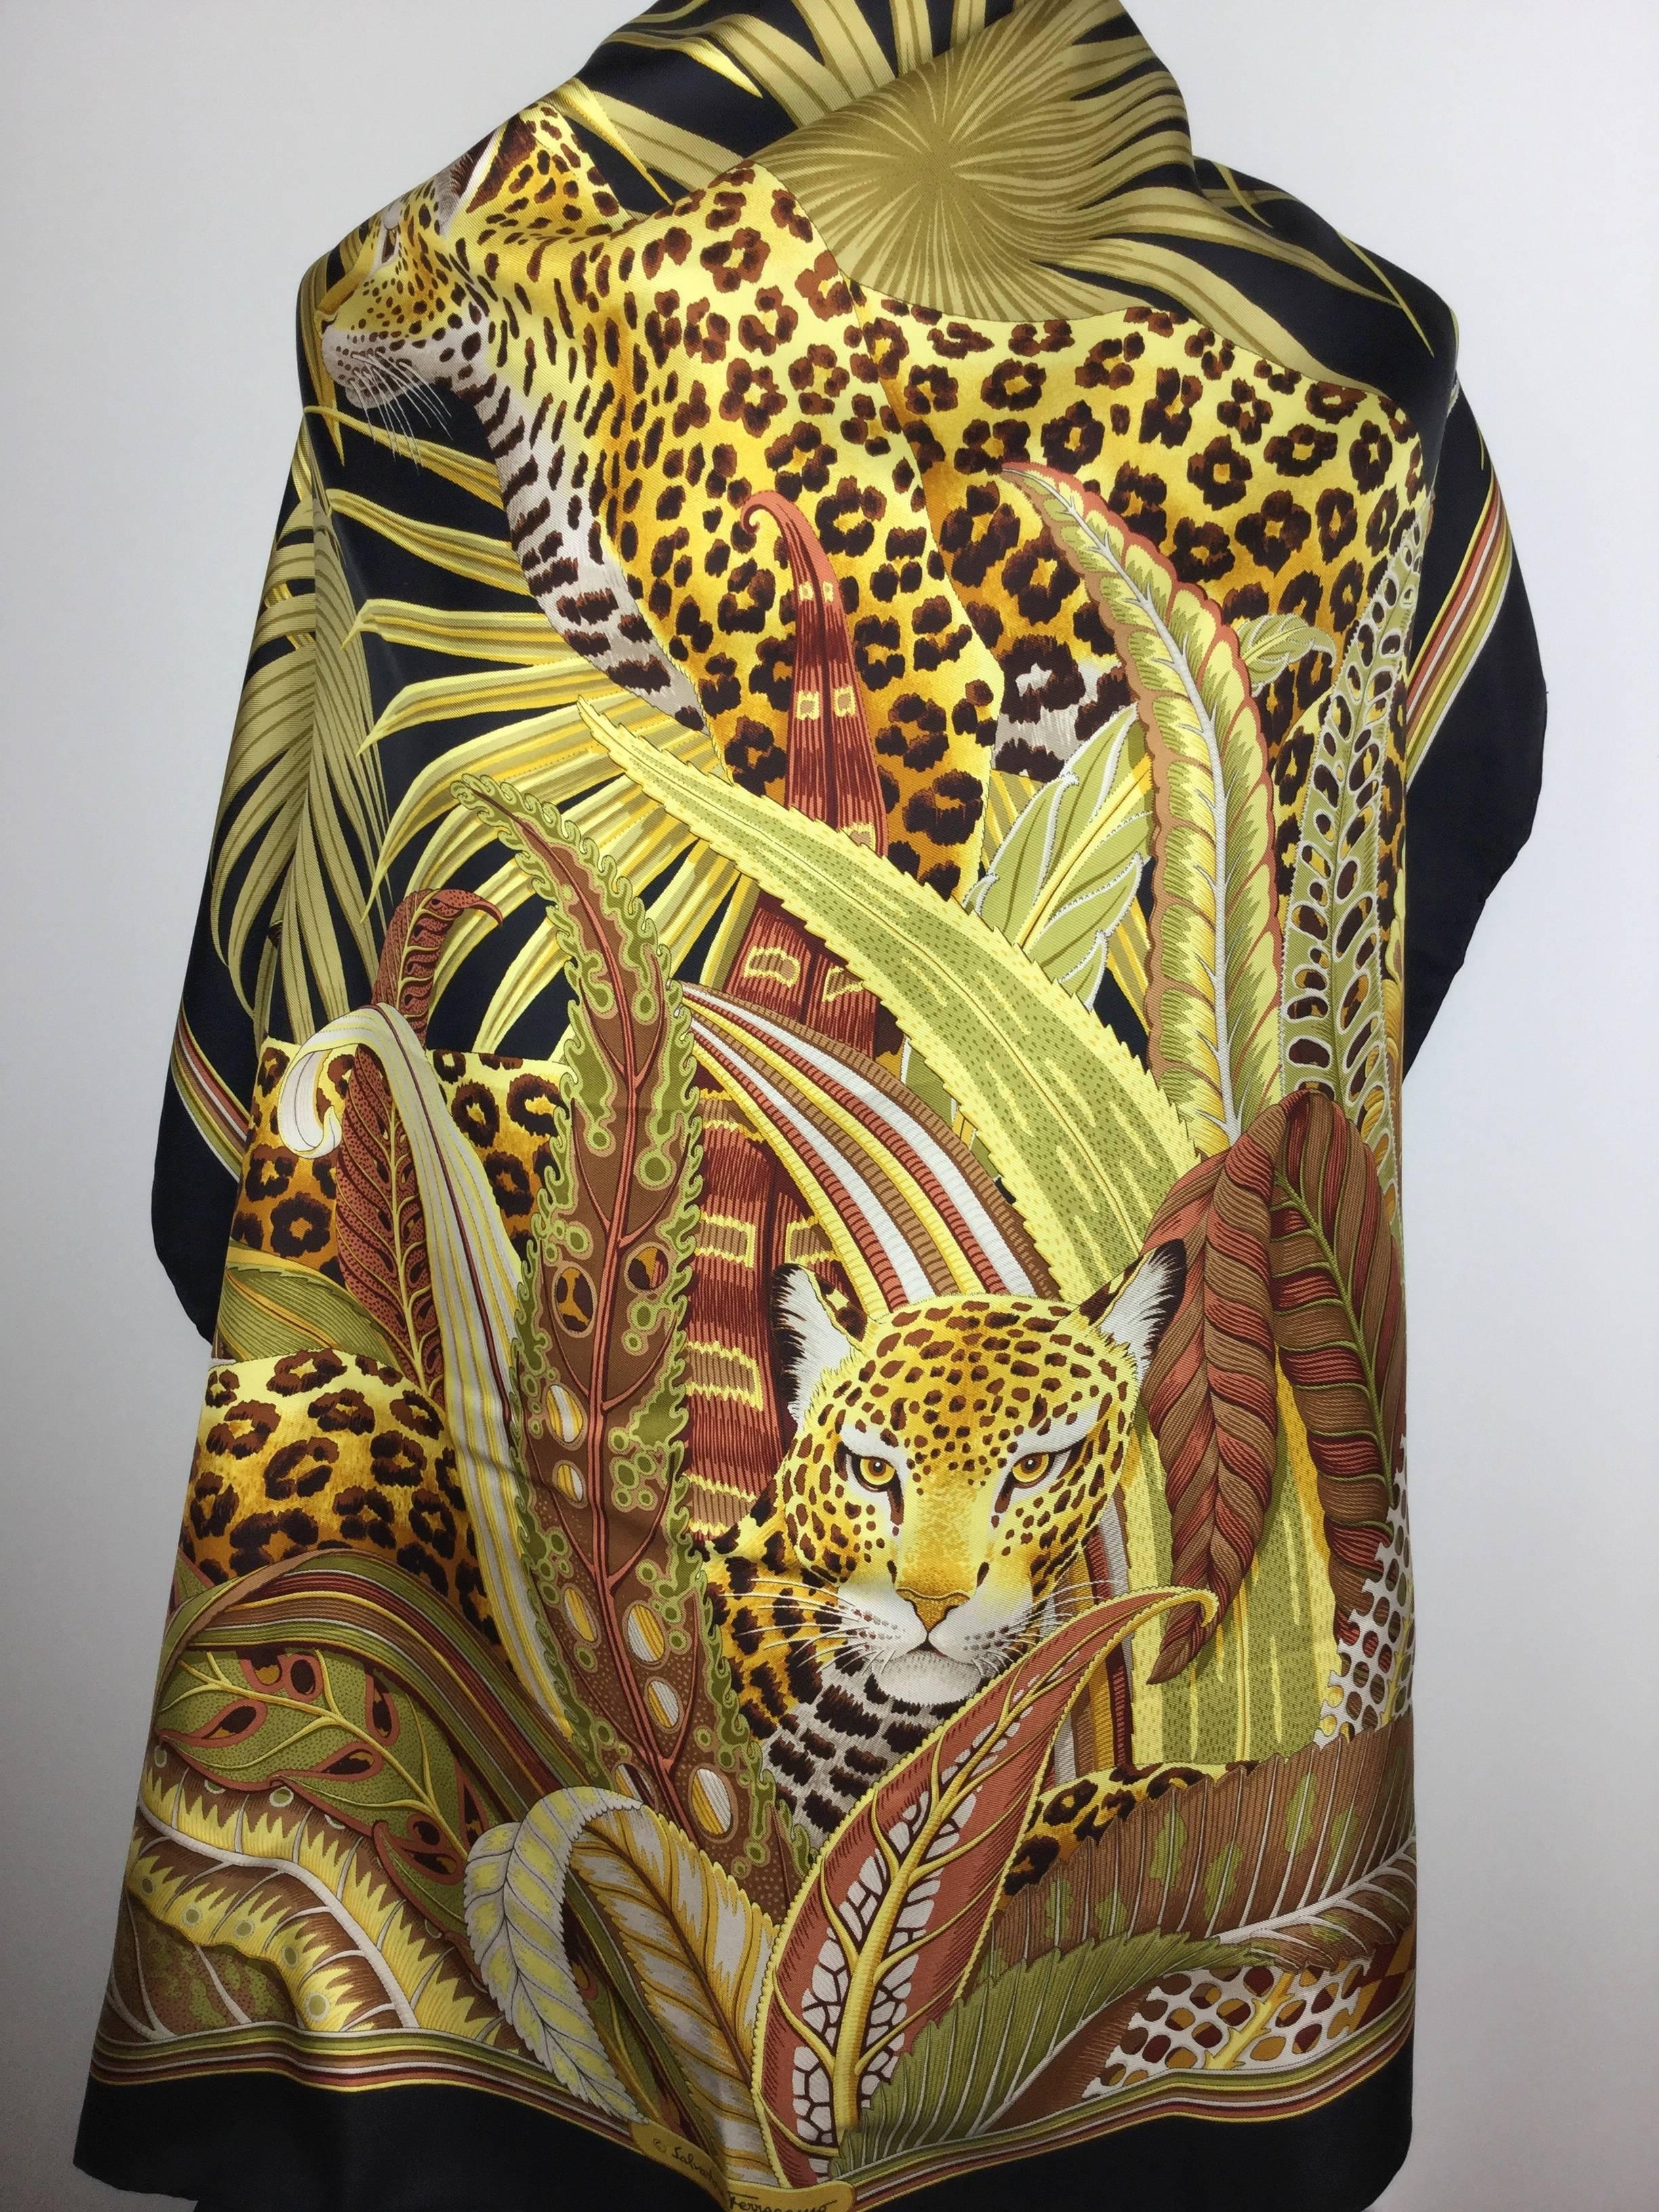 
Huge jungle themed vintage silk scarf by Salvatore Ferragamo.

Can be worn as a scarf or a shawl.

Here three leopards are rendered in incredible detail against a background
of stylized, swirling plant forms.

These big cats really engage